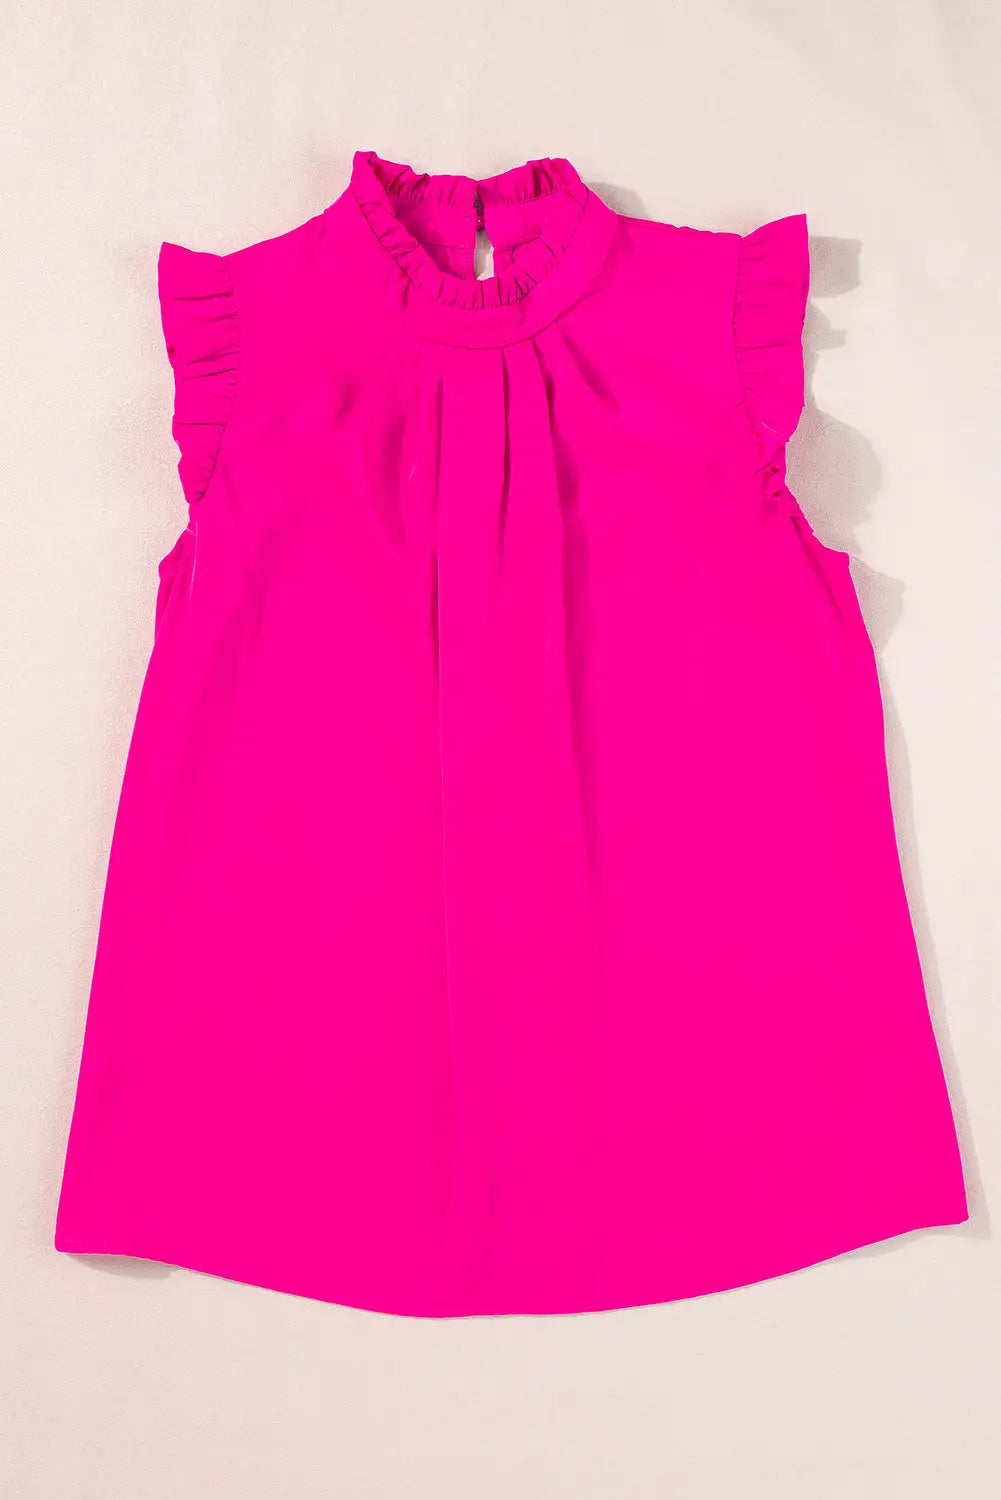 Bright pink pleated sleeveless top - tops/tank tops